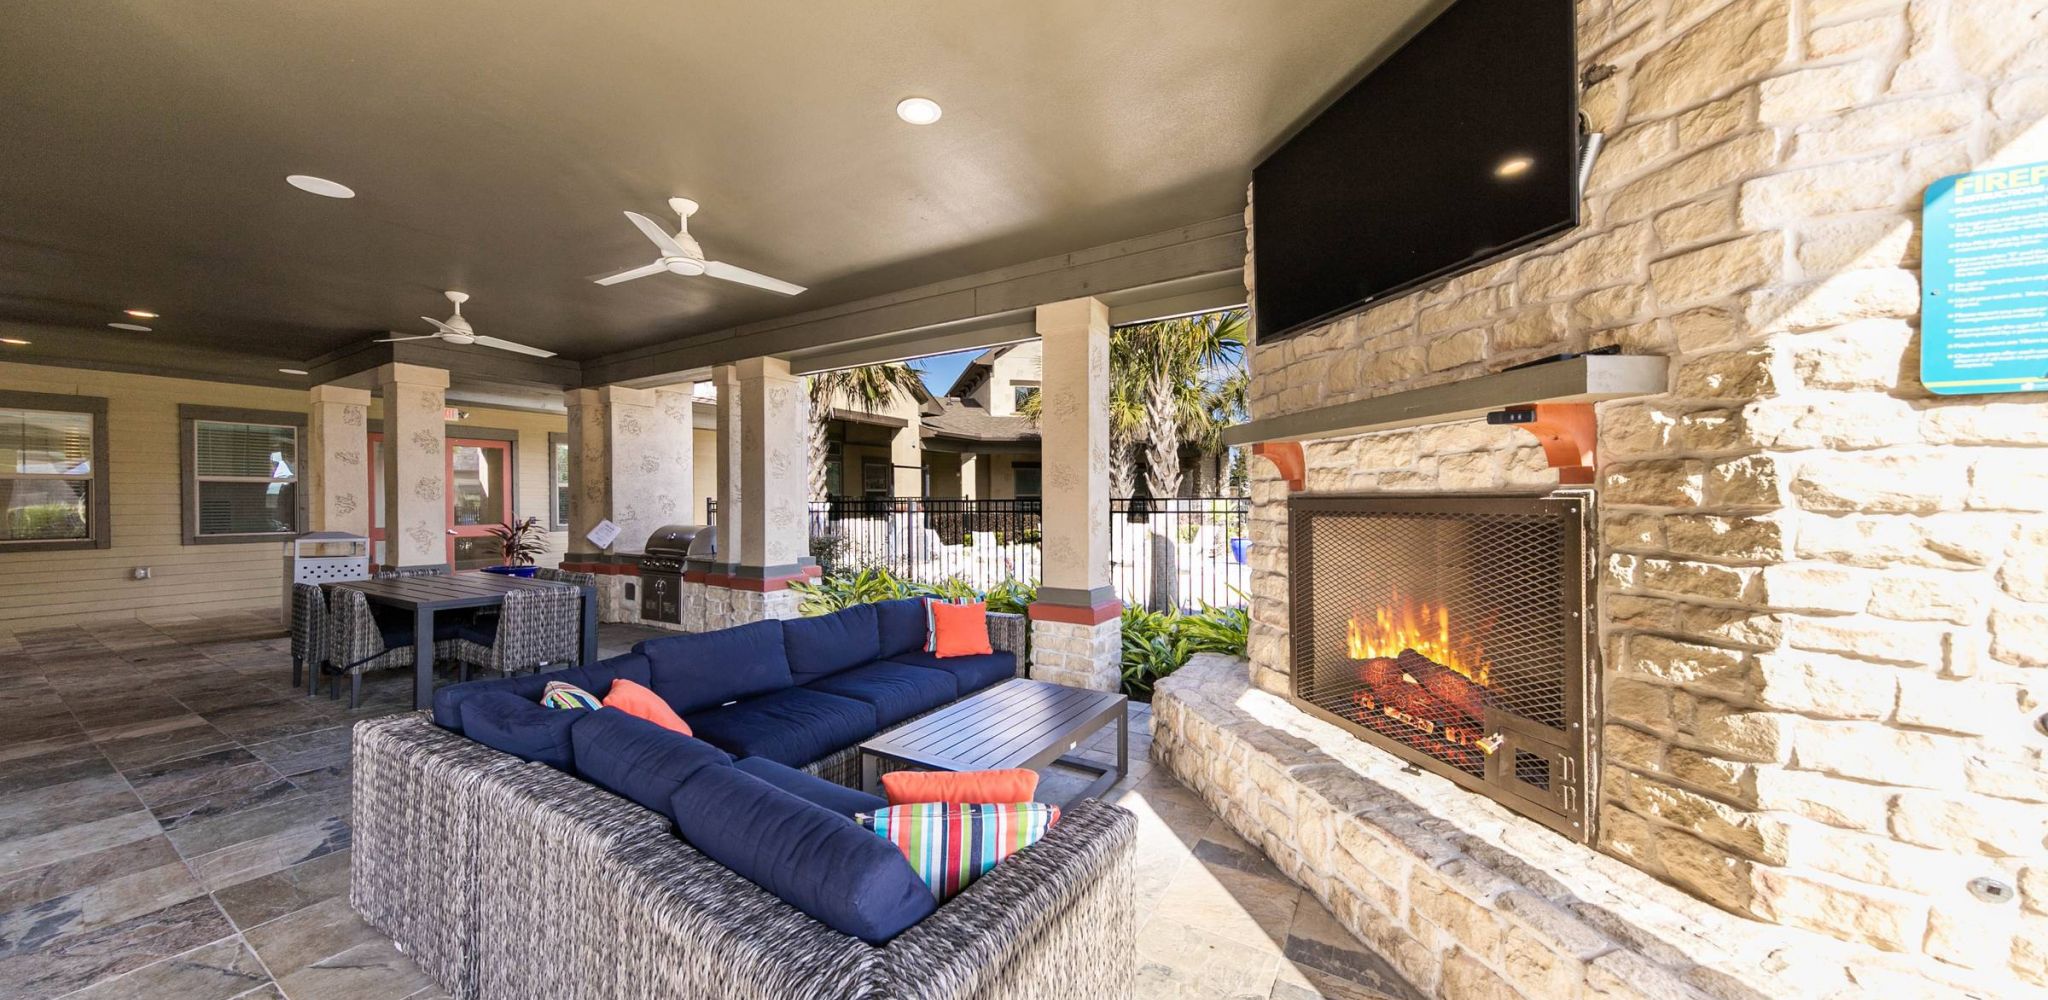 Hawthorne at Crenshaw outdoor covered patio with seating and fireplace